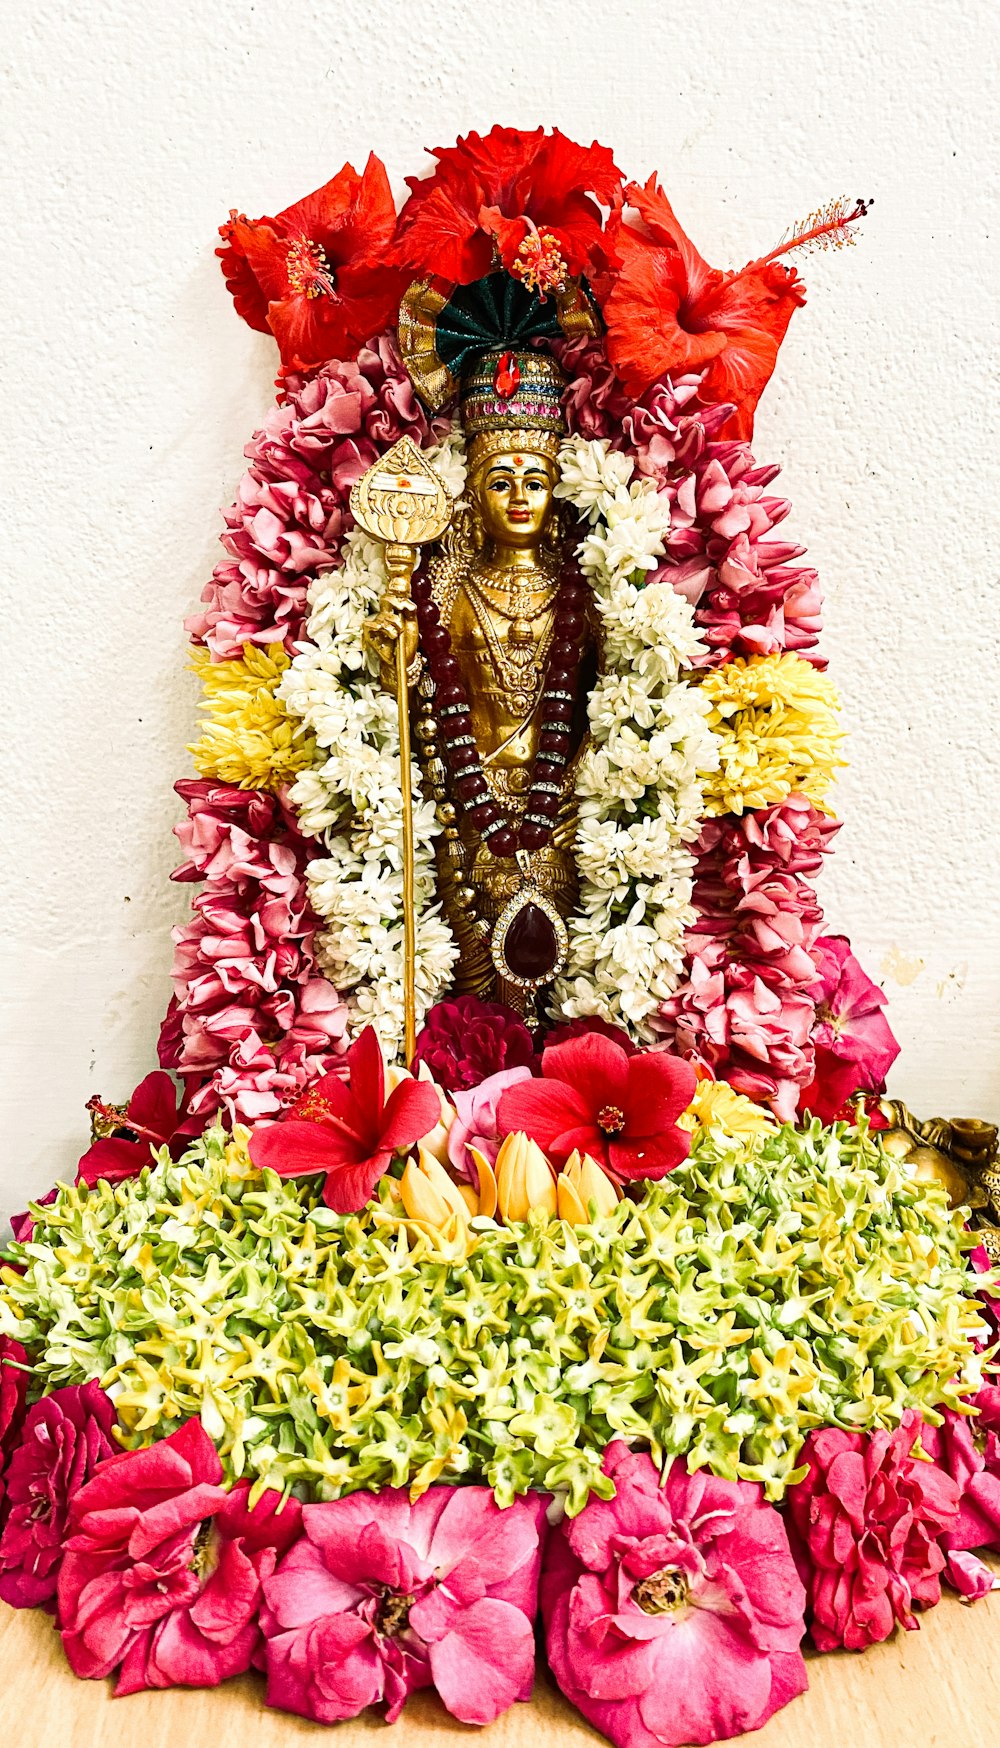 a statue of a person surrounded by flowers